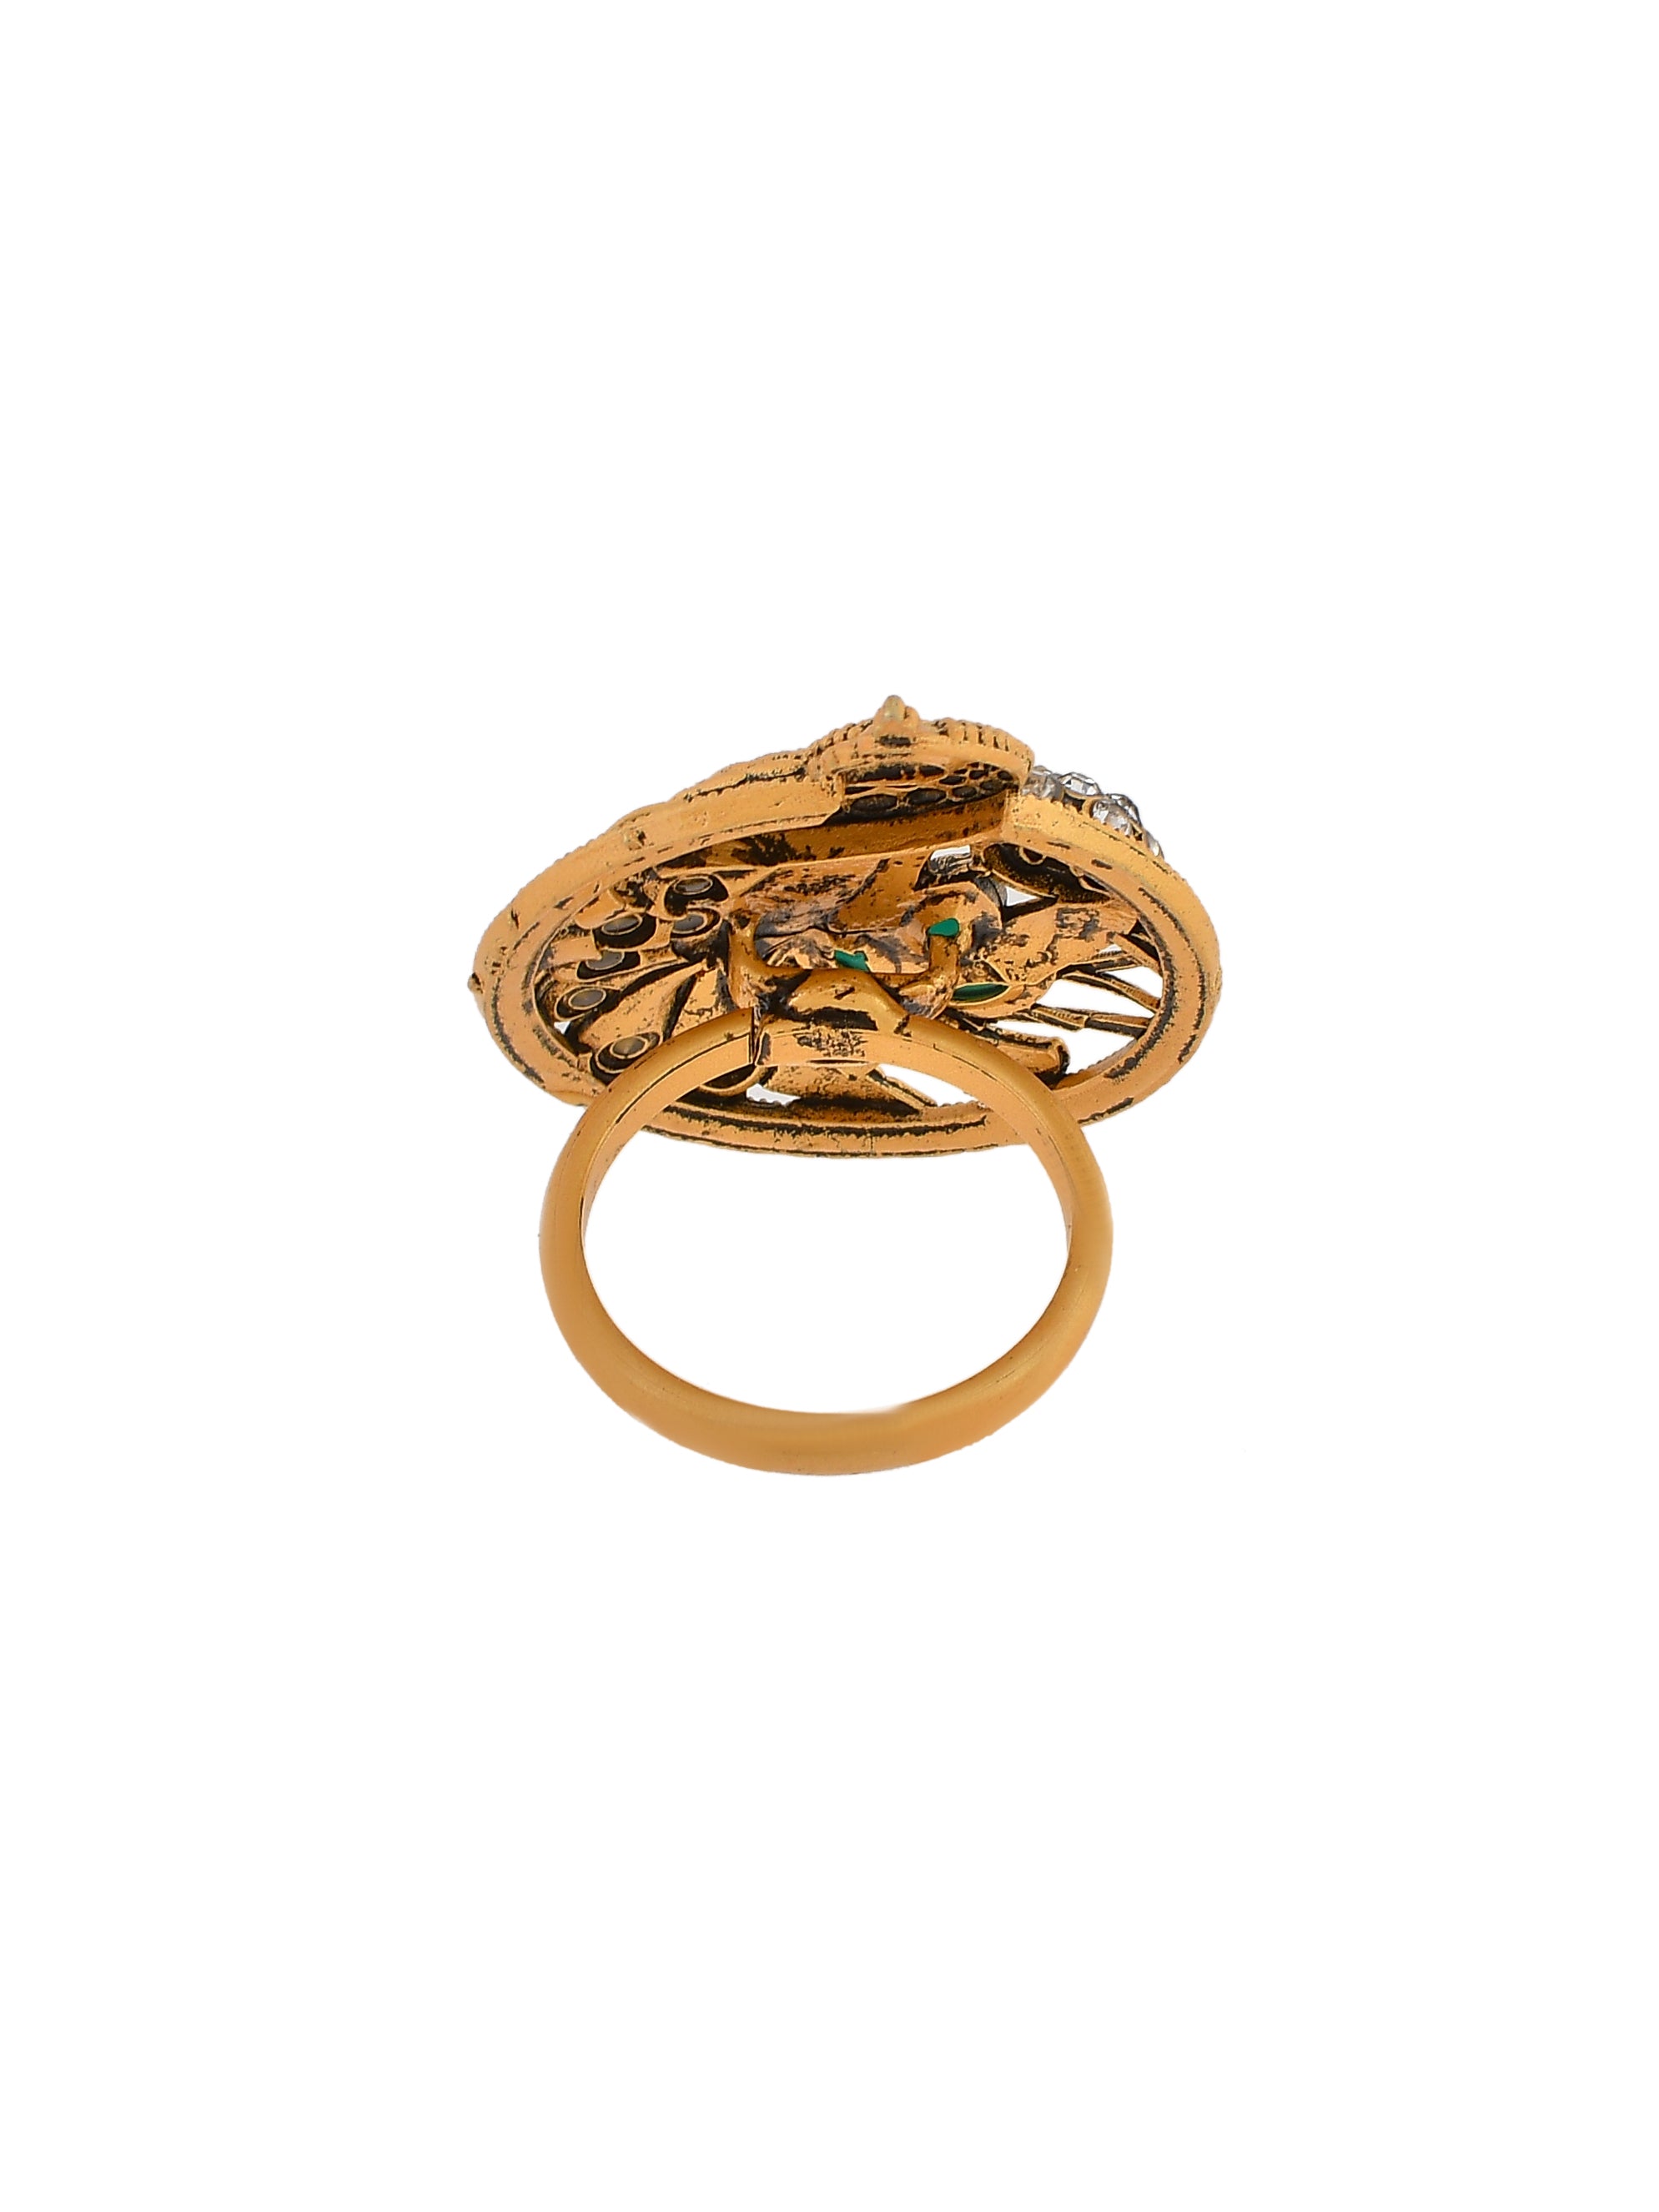 Buy Rings Online for Women & Girls at Best Prices in India